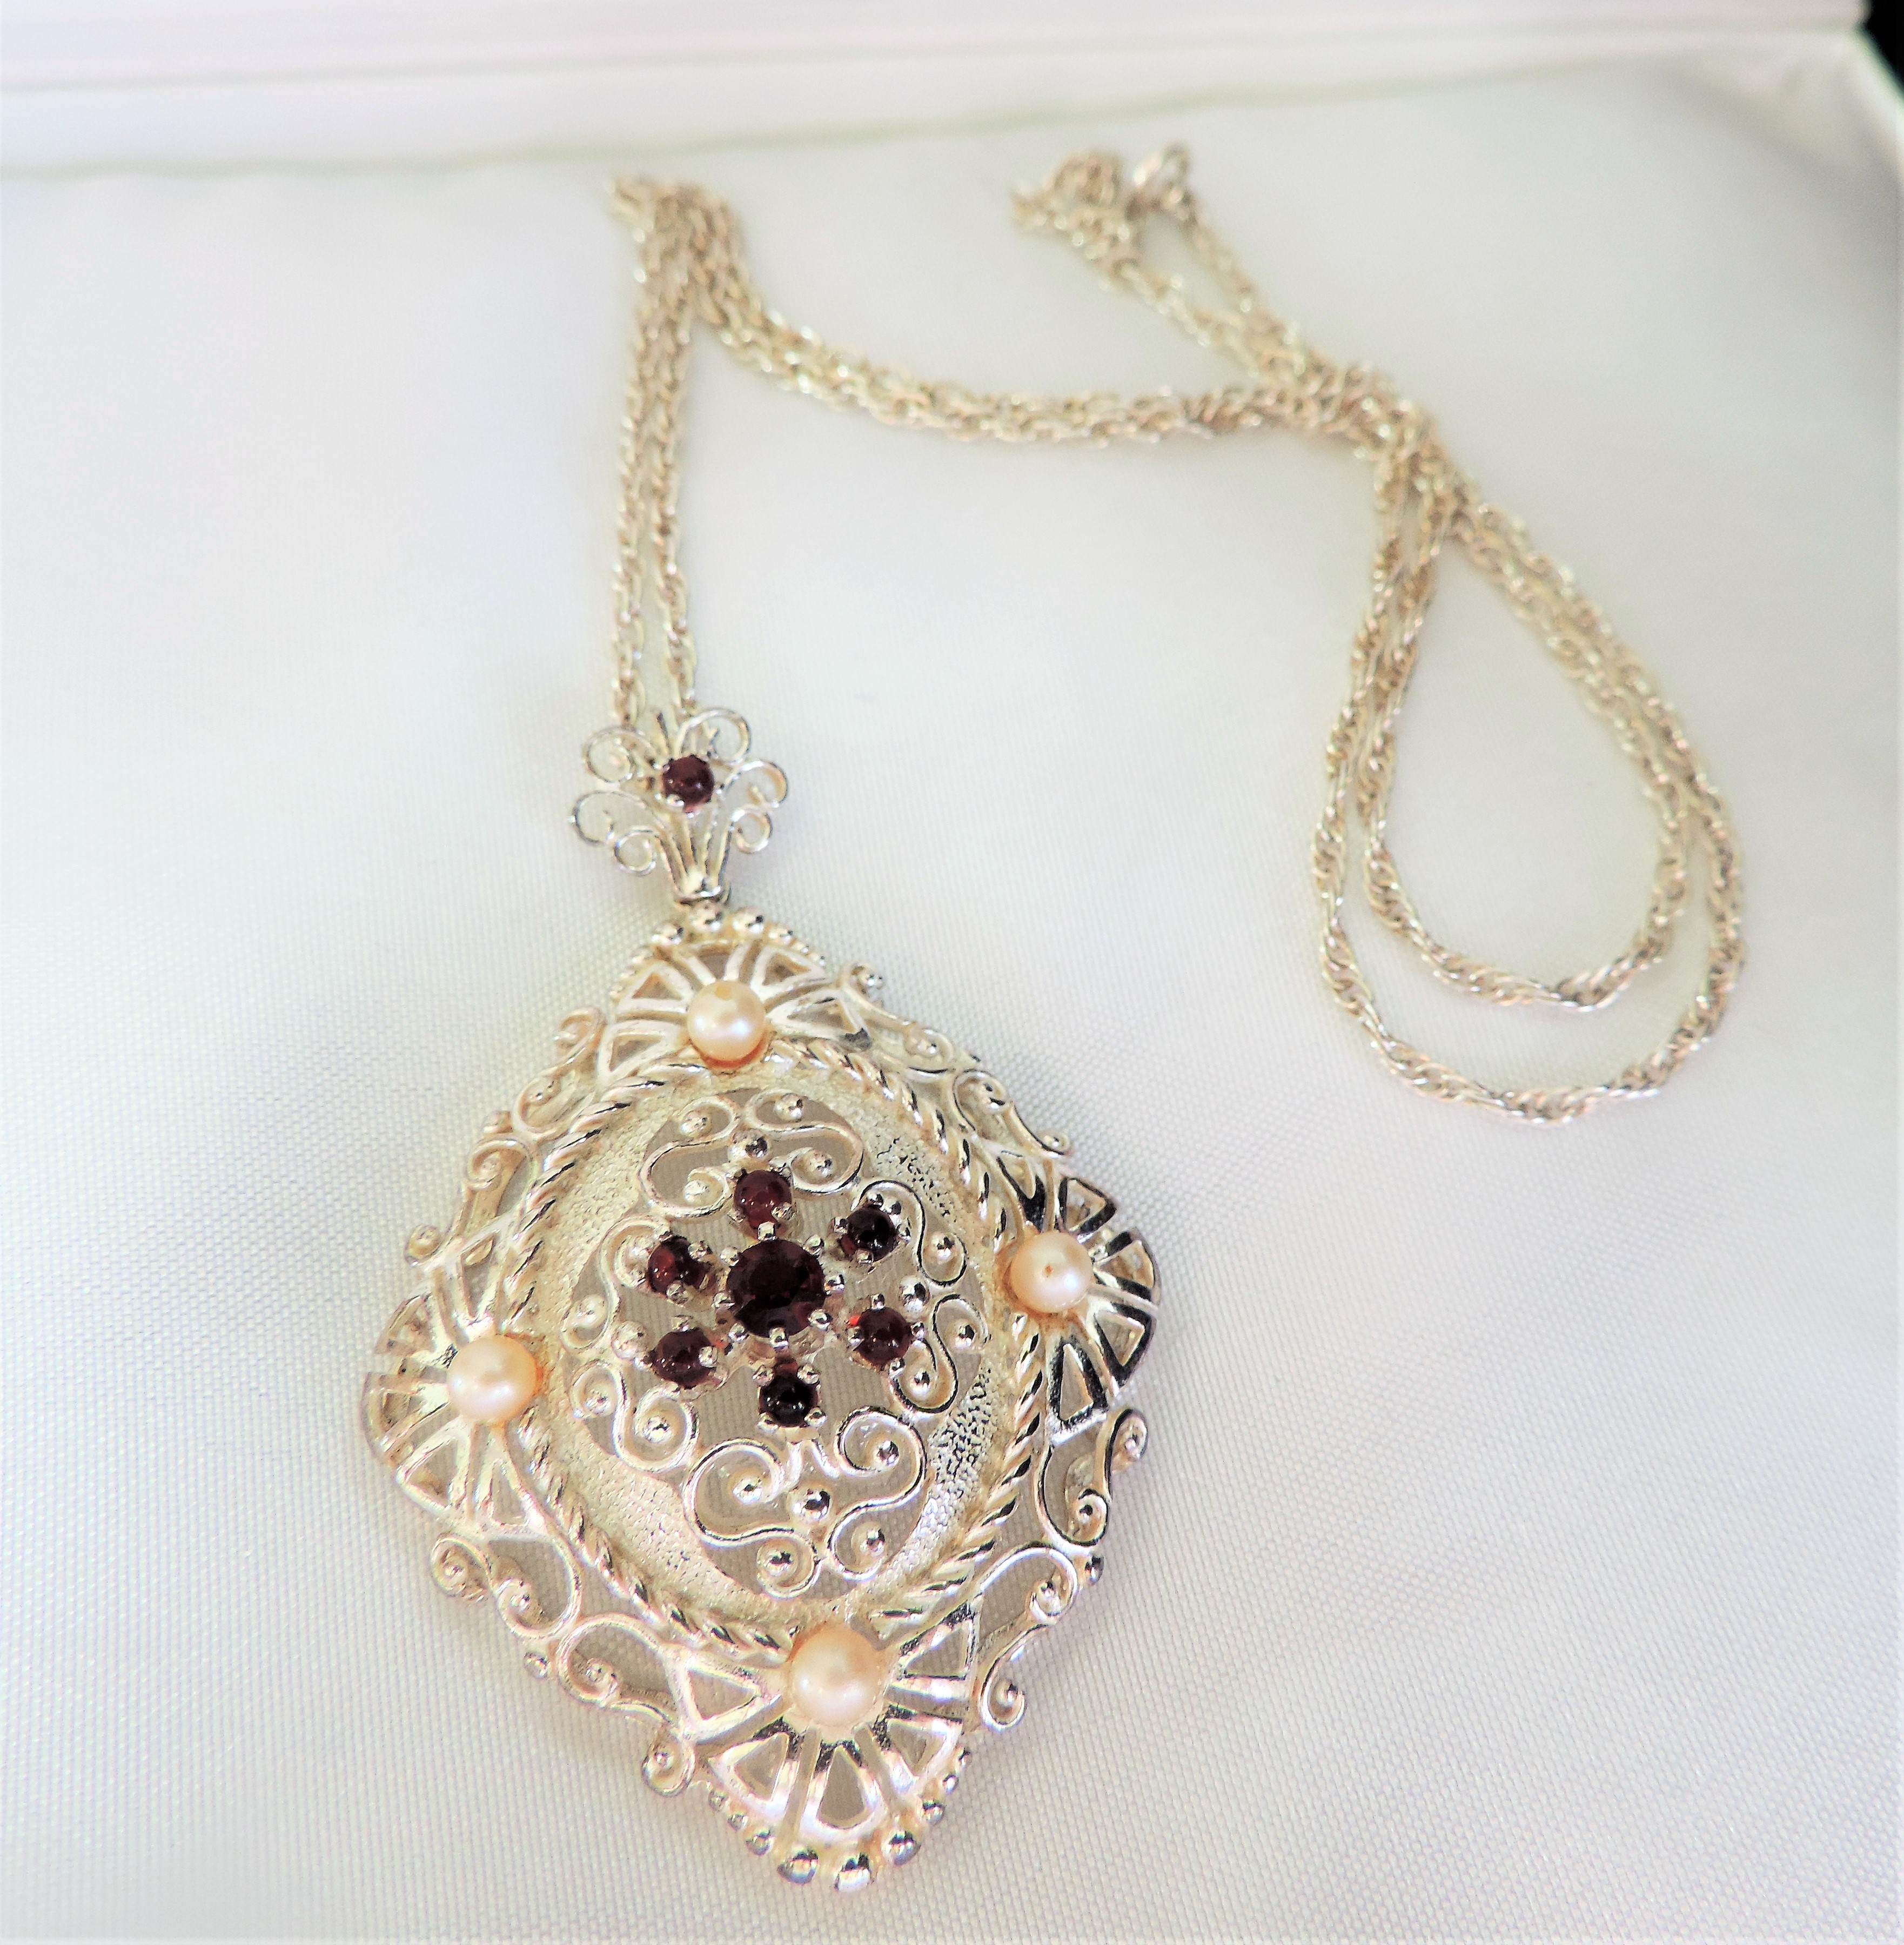 Sterling Silver Pearl & Garnet Pendant Necklace - Image 3 of 4